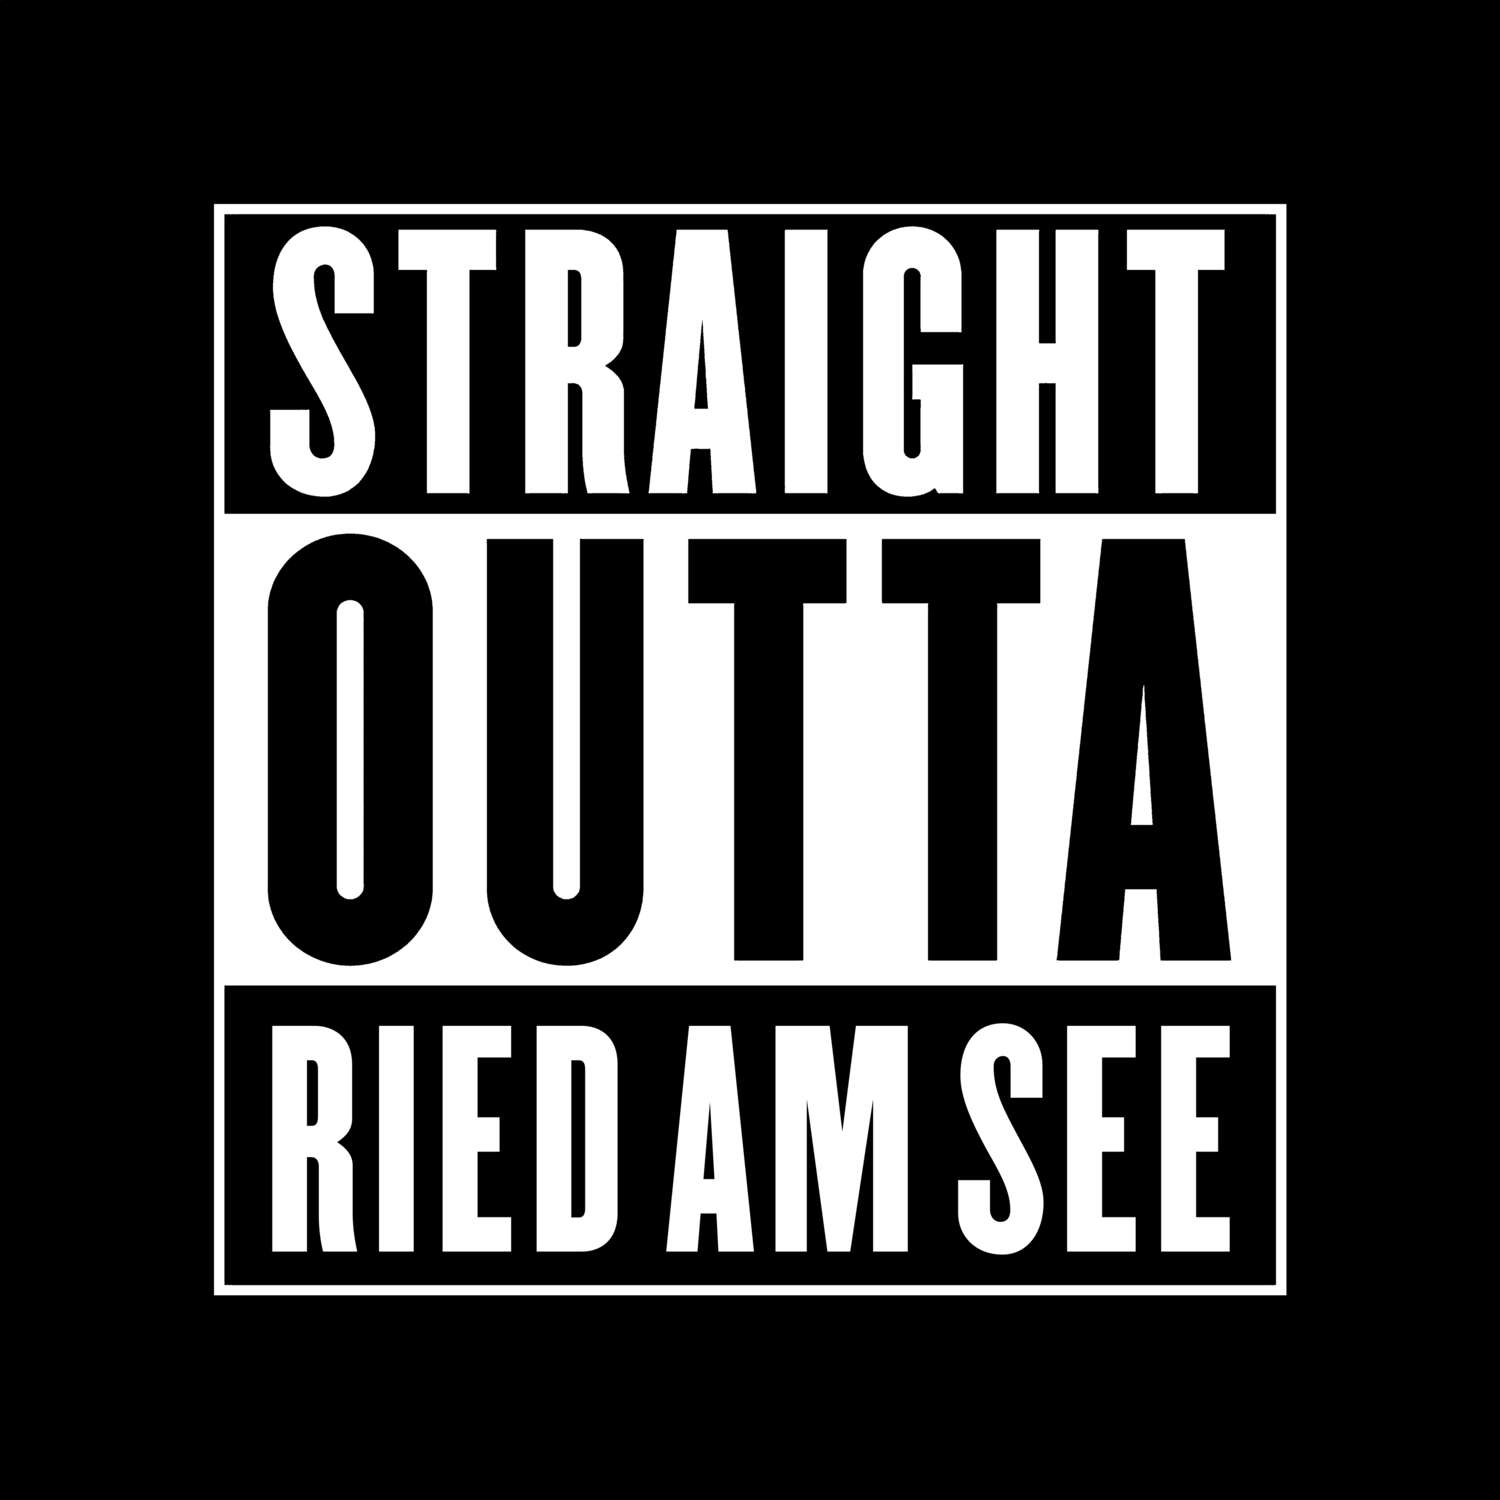 Ried am See T-Shirt »Straight Outta«